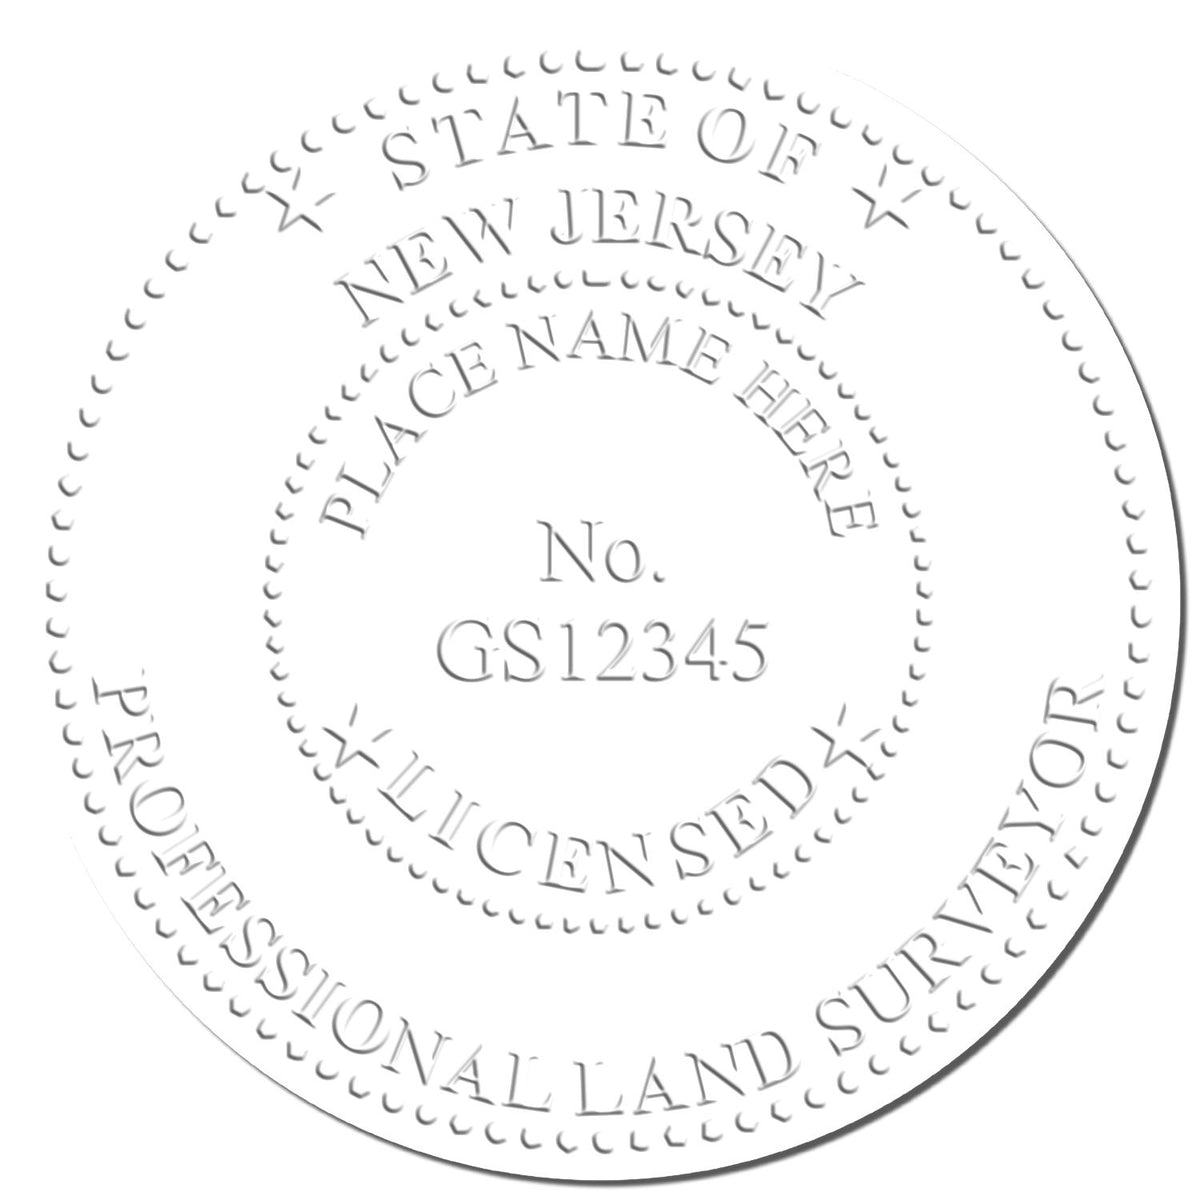 This paper is stamped with a sample imprint of the State of New Jersey Soft Land Surveyor Embossing Seal, signifying its quality and reliability.